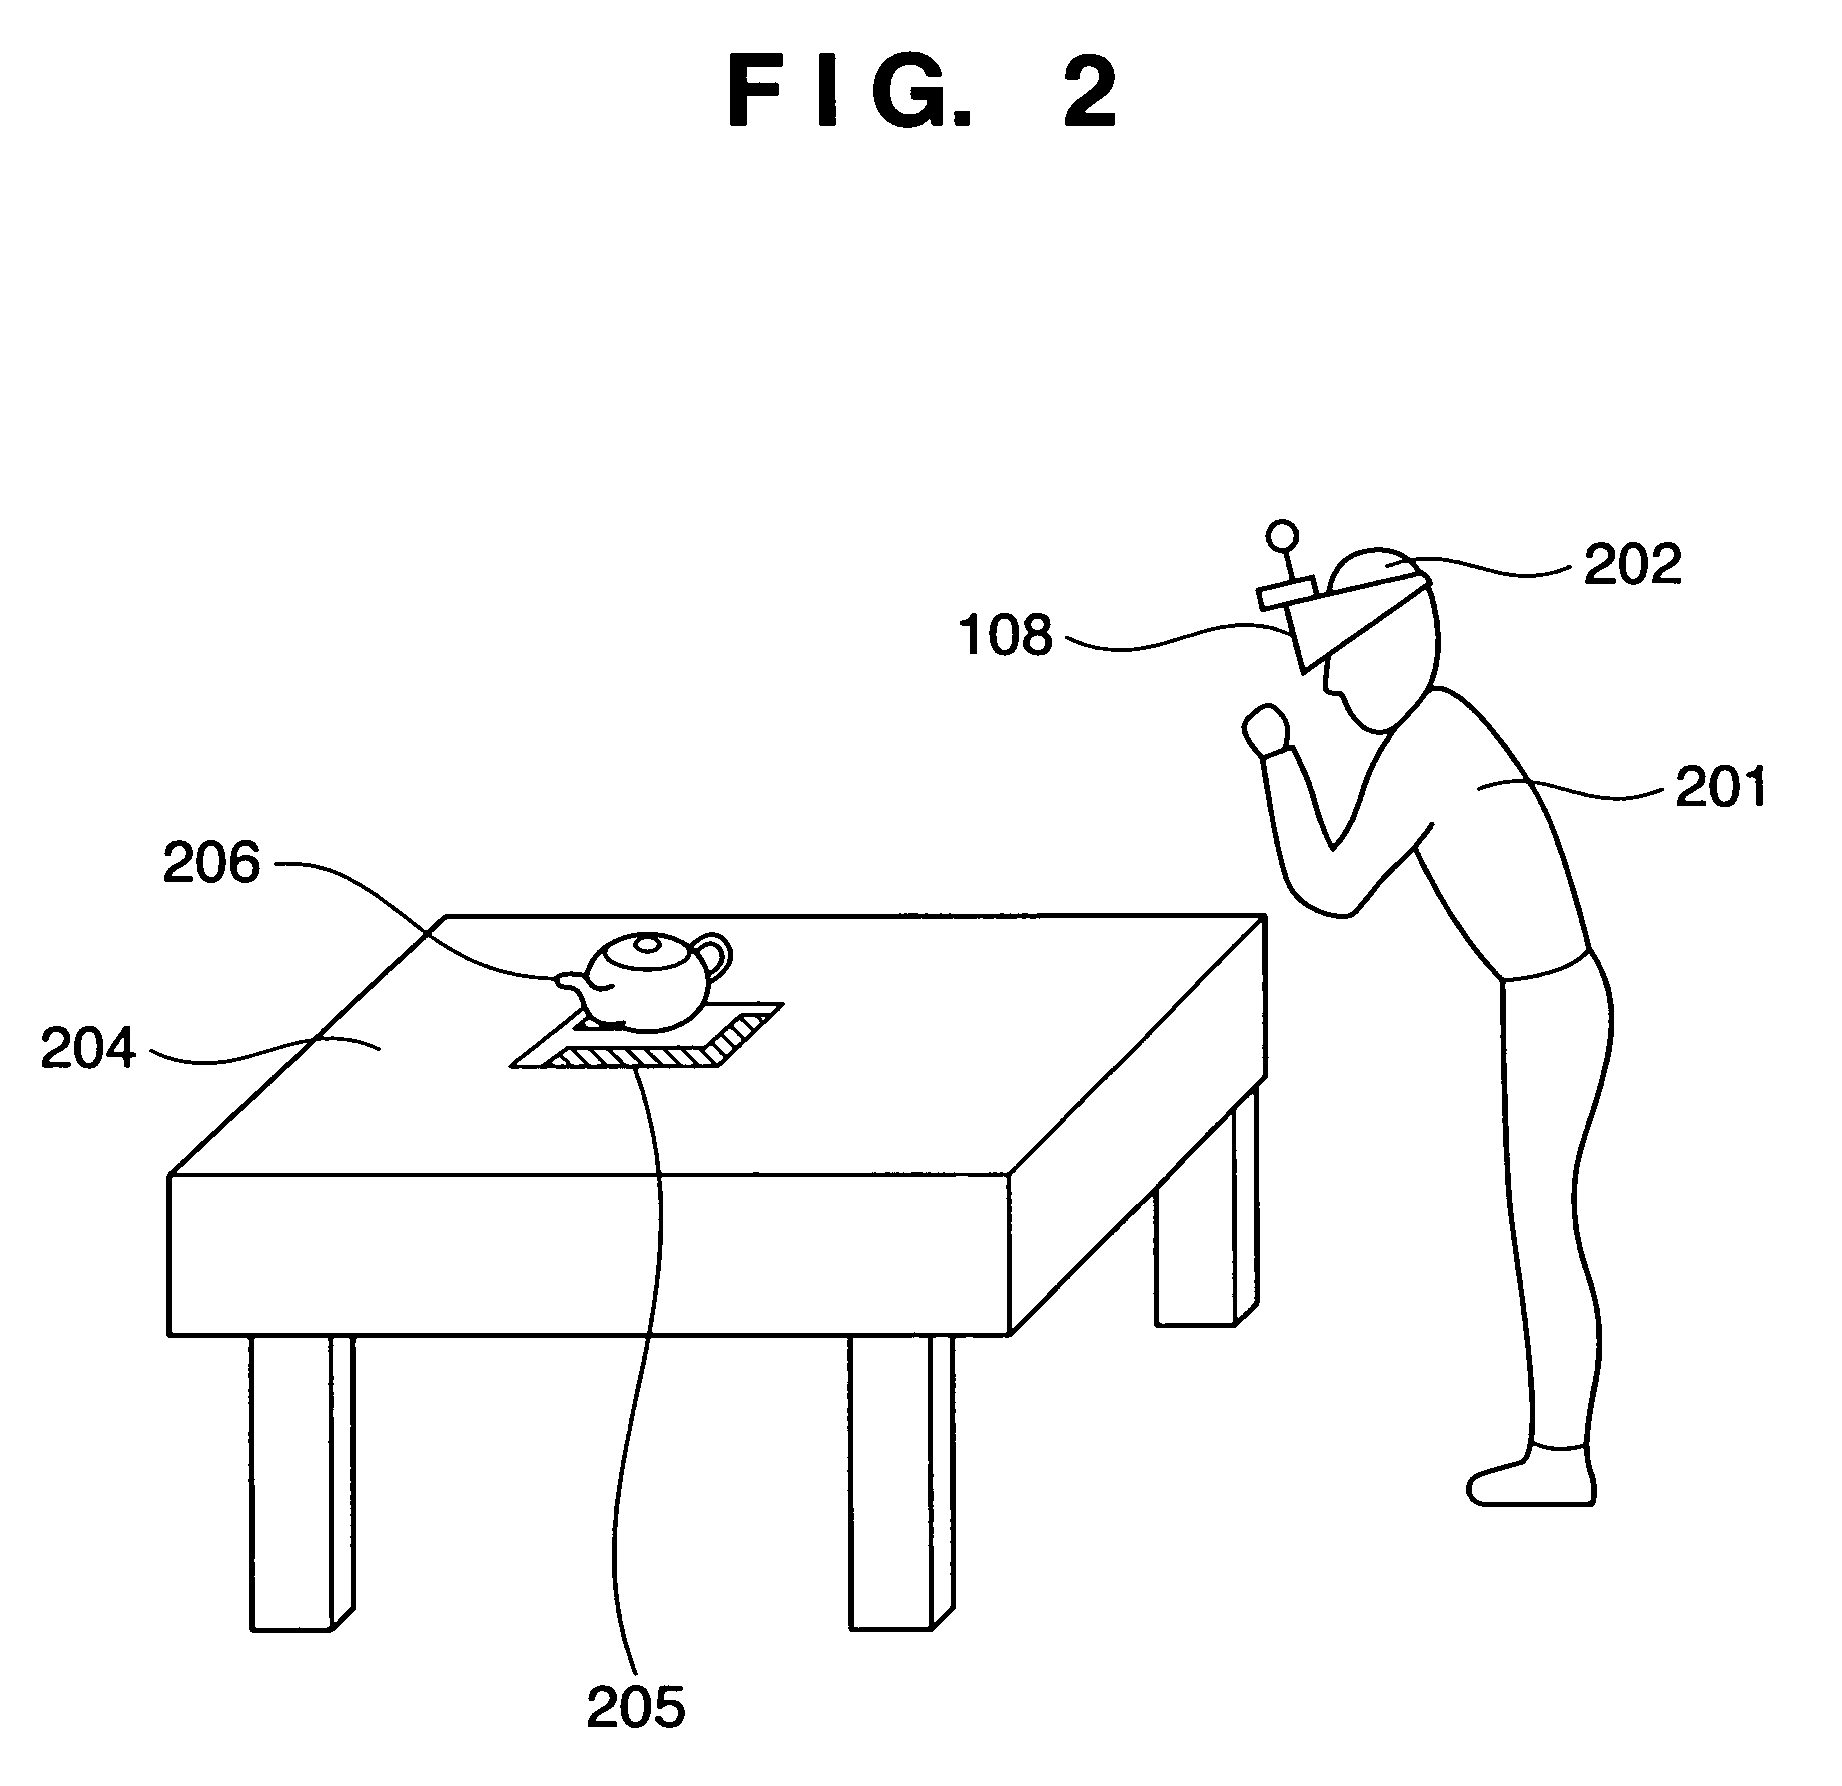 Image compositing method and apparatus for superimposing a computer graphics image on an actually-sensed image